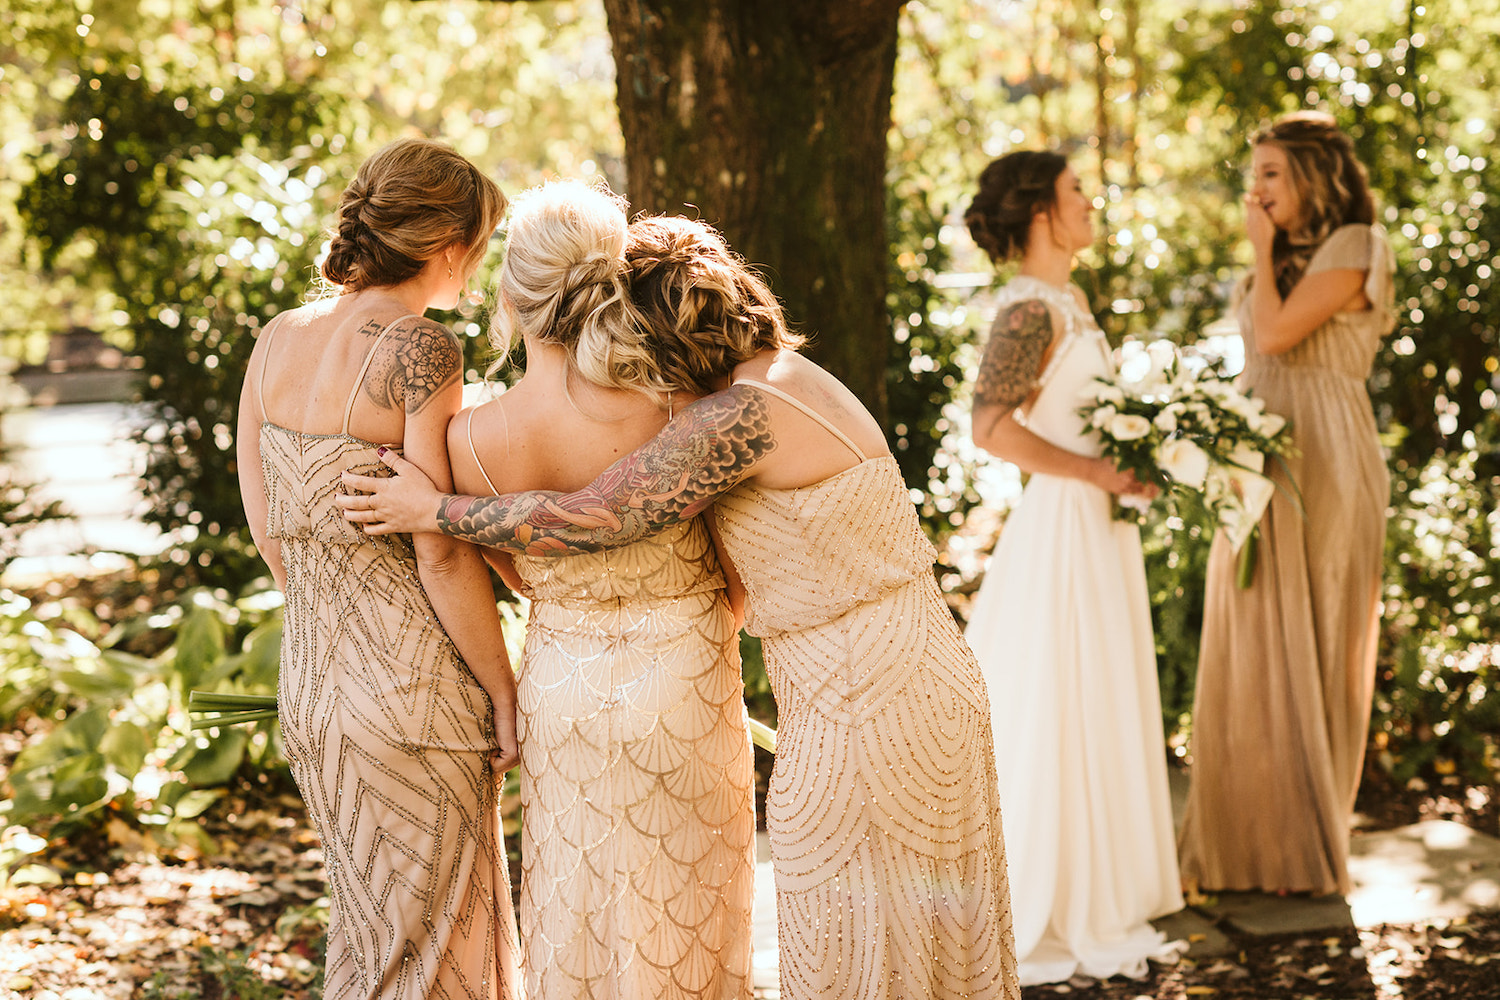 bridesmaids hug each other while bride laughs with another bridesmaid under a large tree